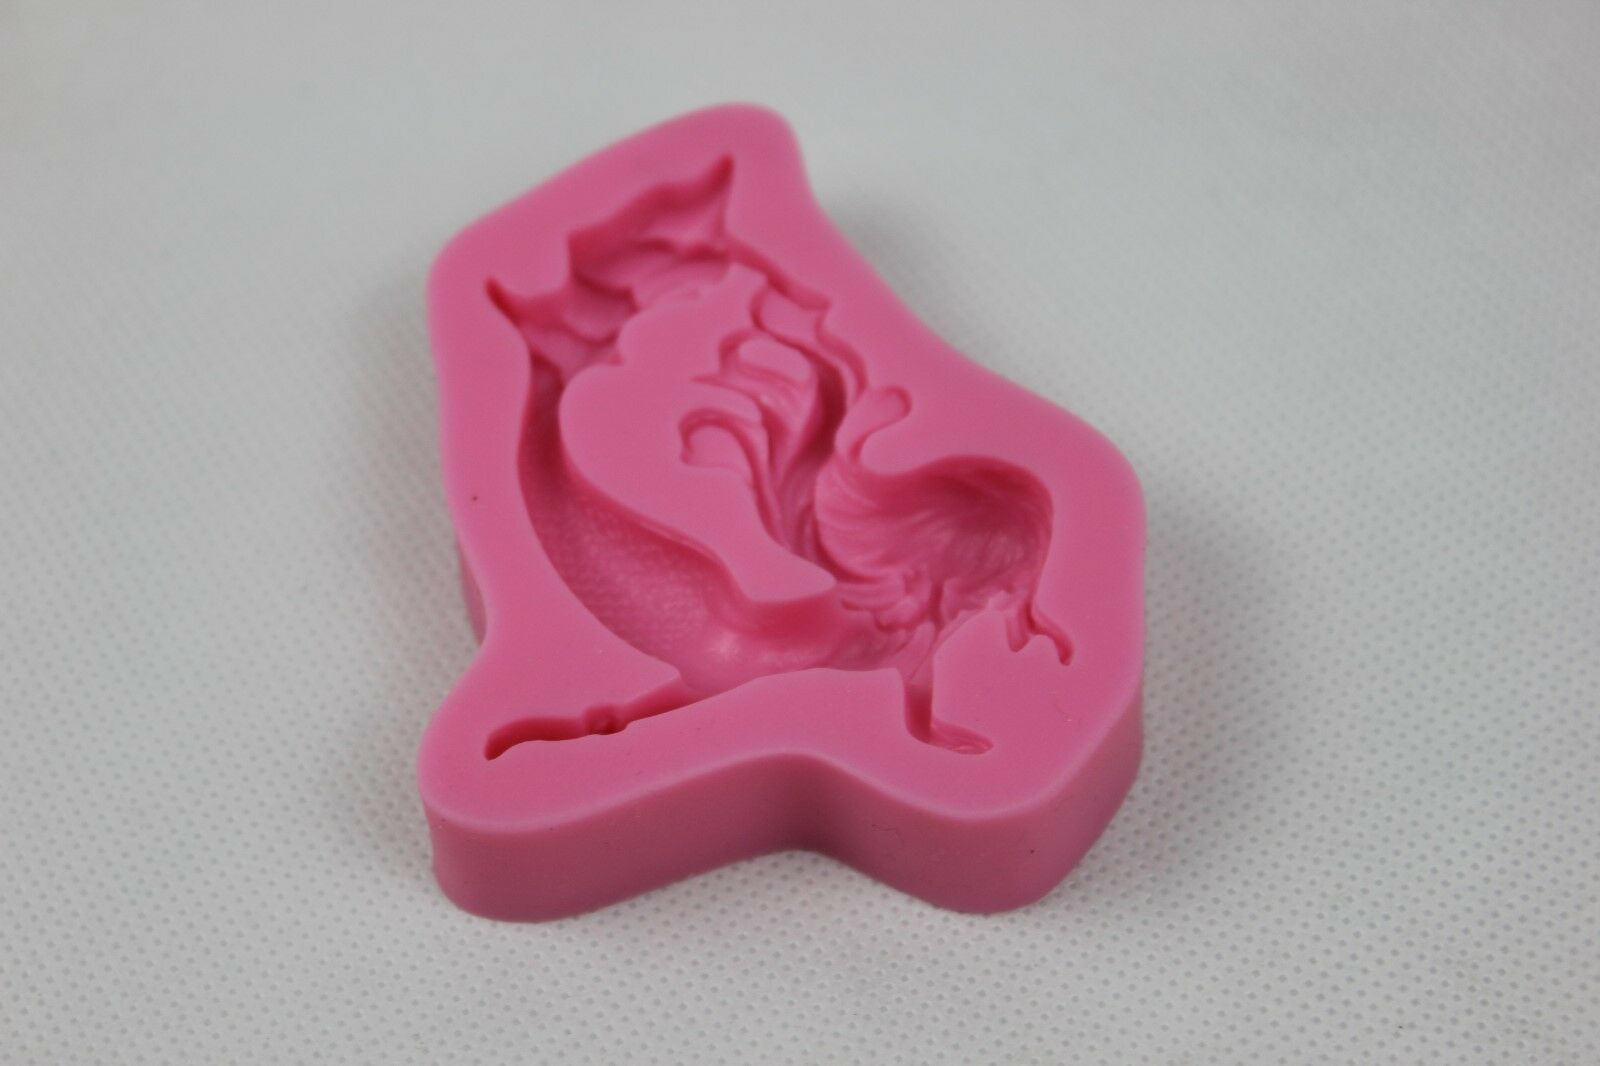 attachment-https://www.cupcakeaddicts.co.uk/wp-content/uploads/imported/3/Mermaid-Silicone-Mould-Fairy-Cup-Cake-Icing-Baking-Decorating-Birthday-Toppers-323163245923-5.jpg